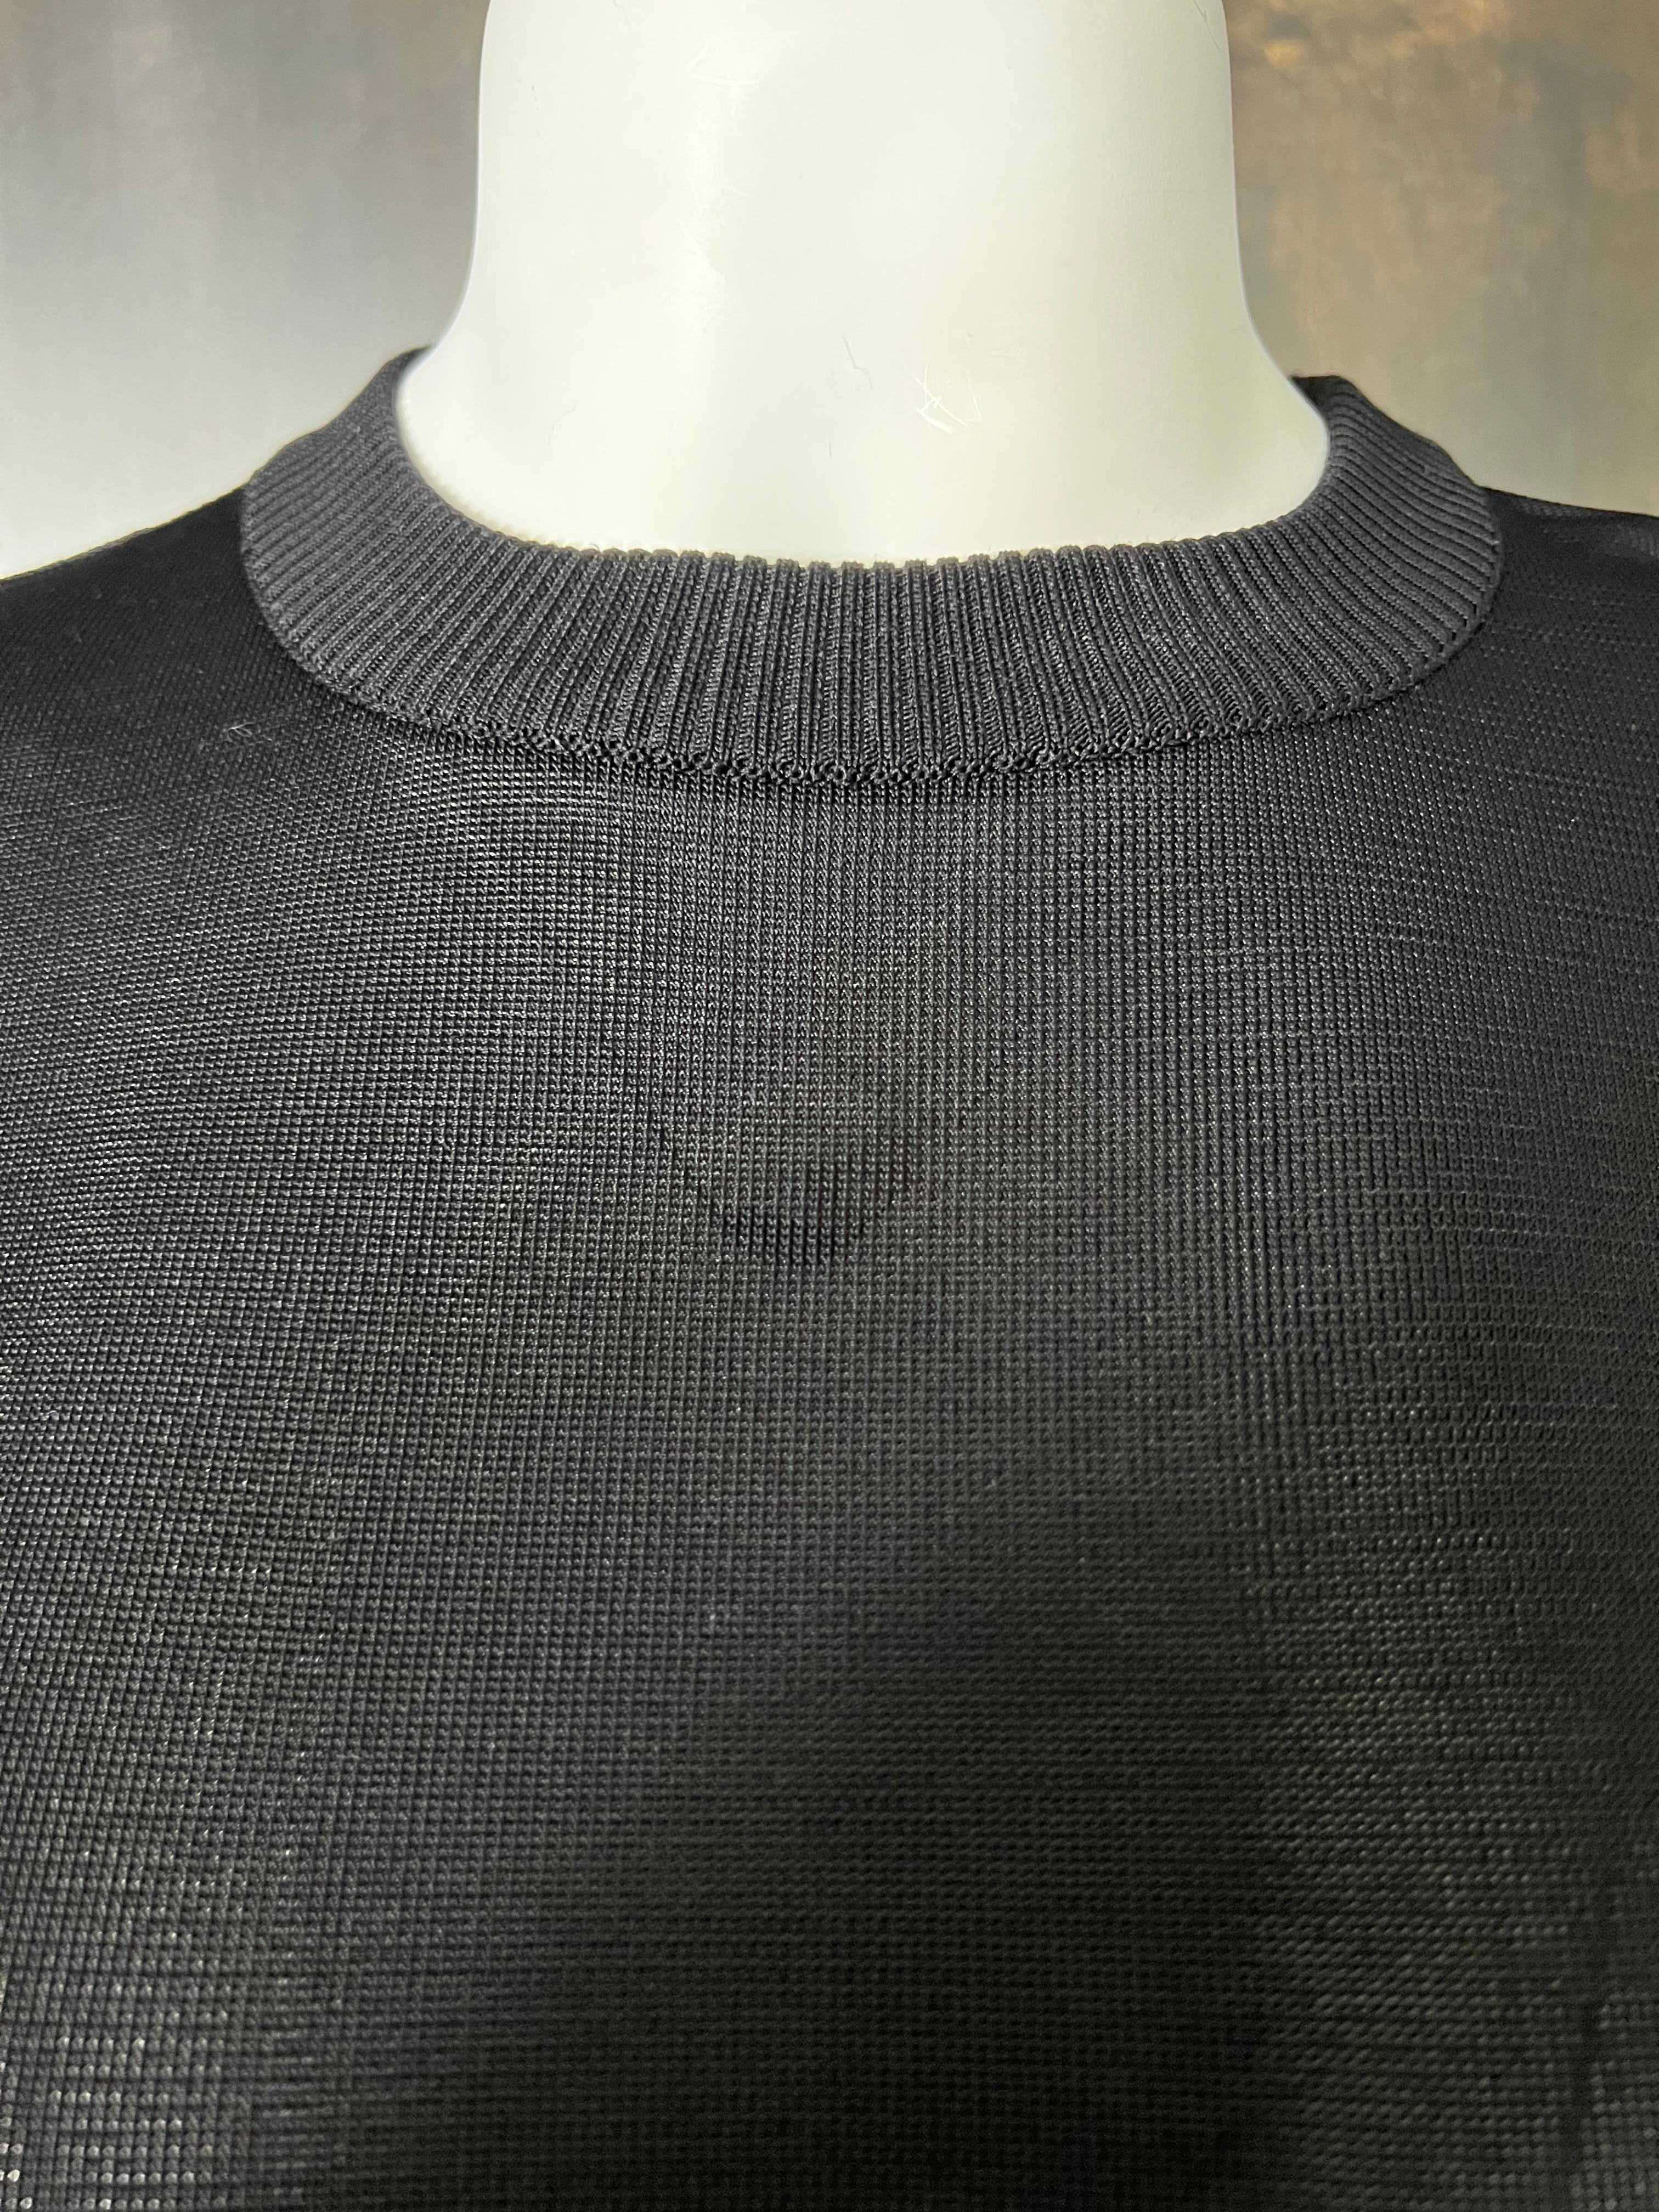 - Knit & see through finish
- Long Sleeves
- Crew neckline 
- Made in Italy 